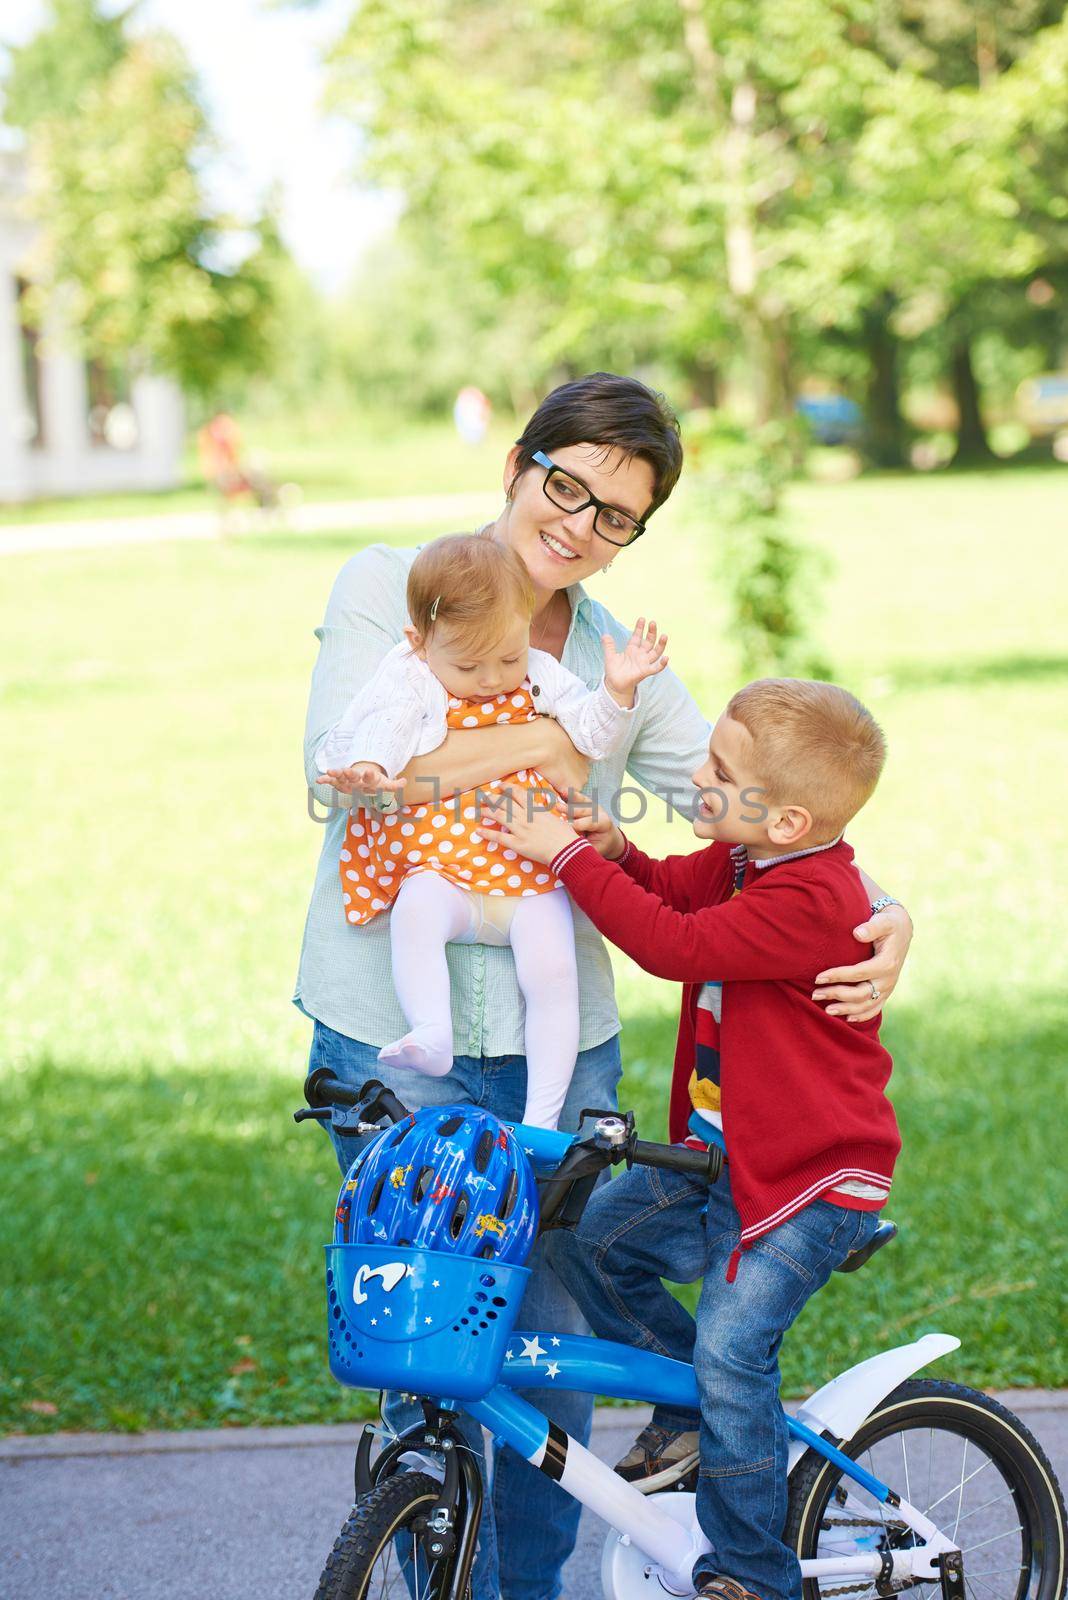 portrait of happy young family,  mother and  kids have fun in park